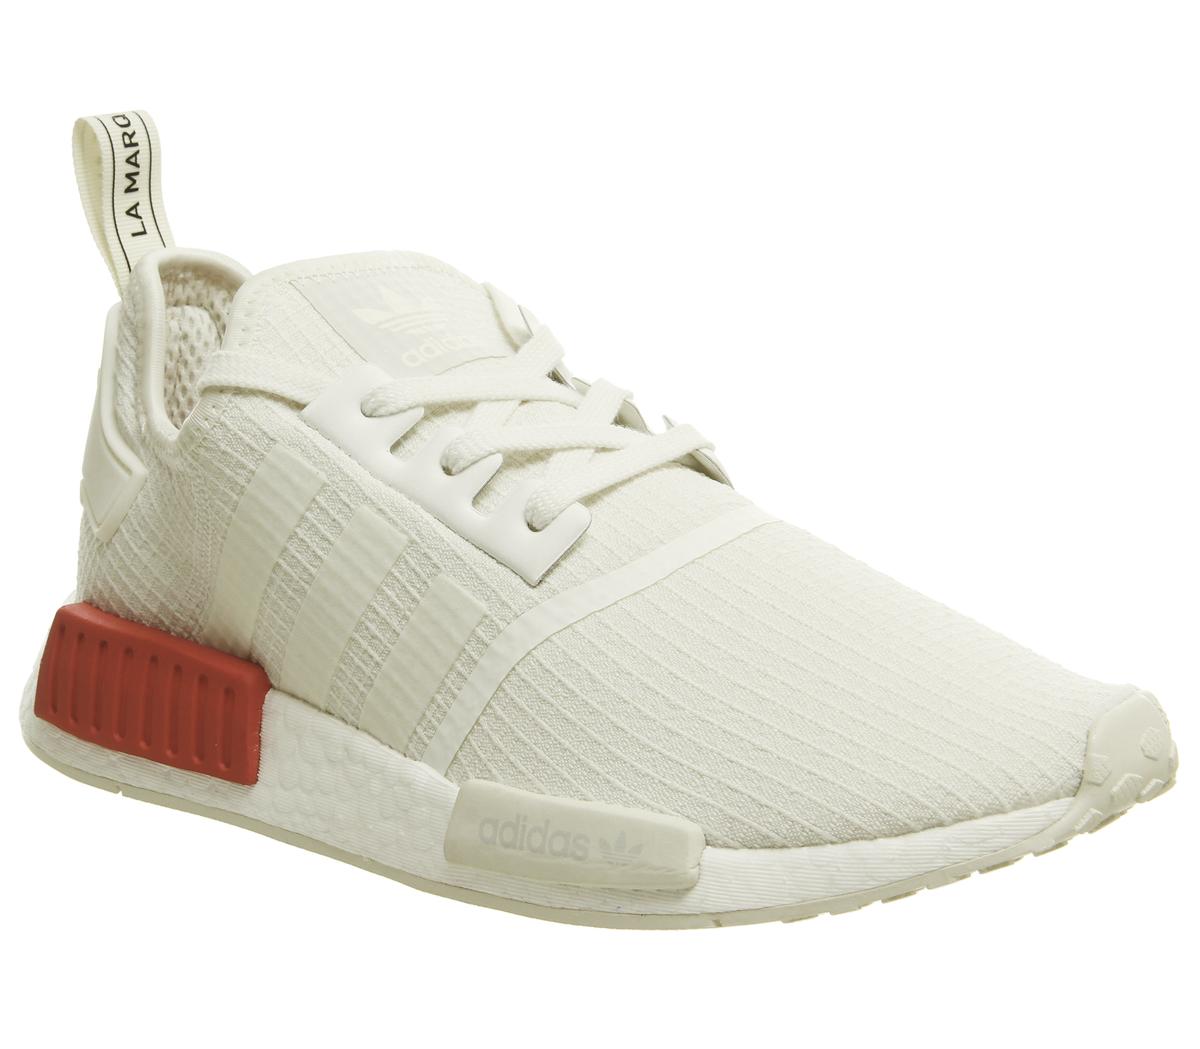 adidas nmd r1 off white red